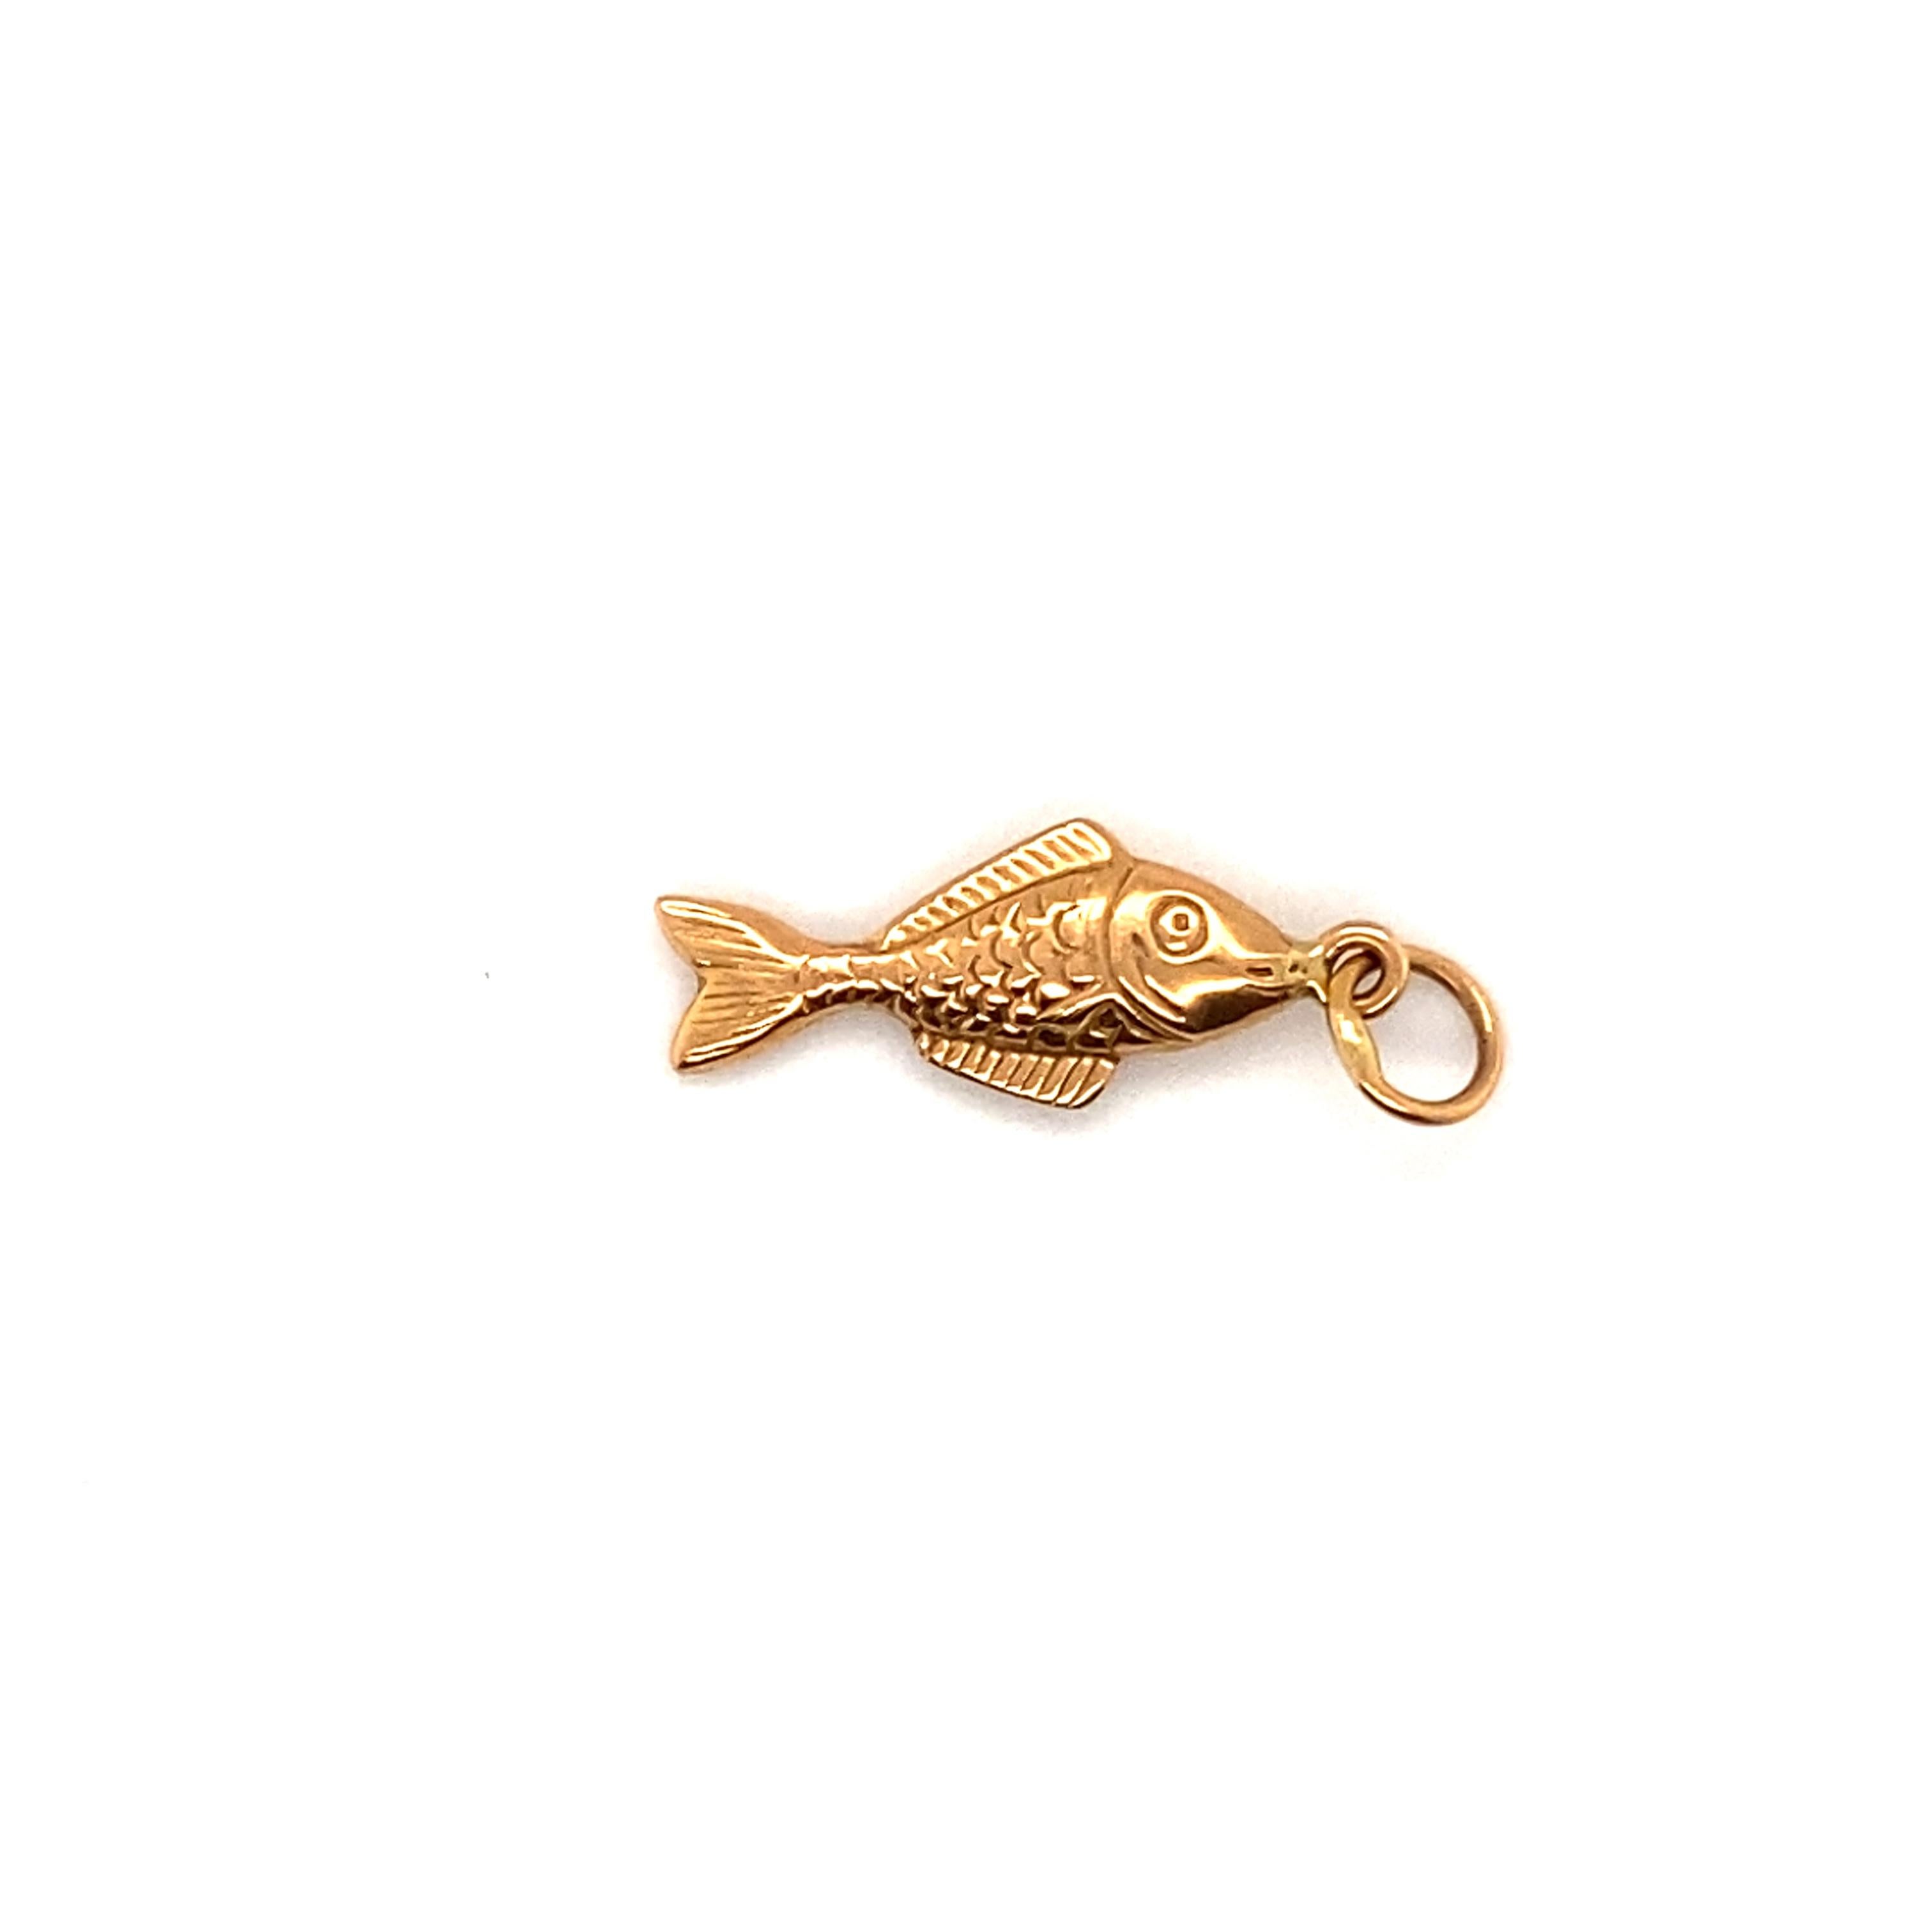 Retro 1950s Hanging Fish Angler Charm set in 14 Karat Yellow Gold For Sale